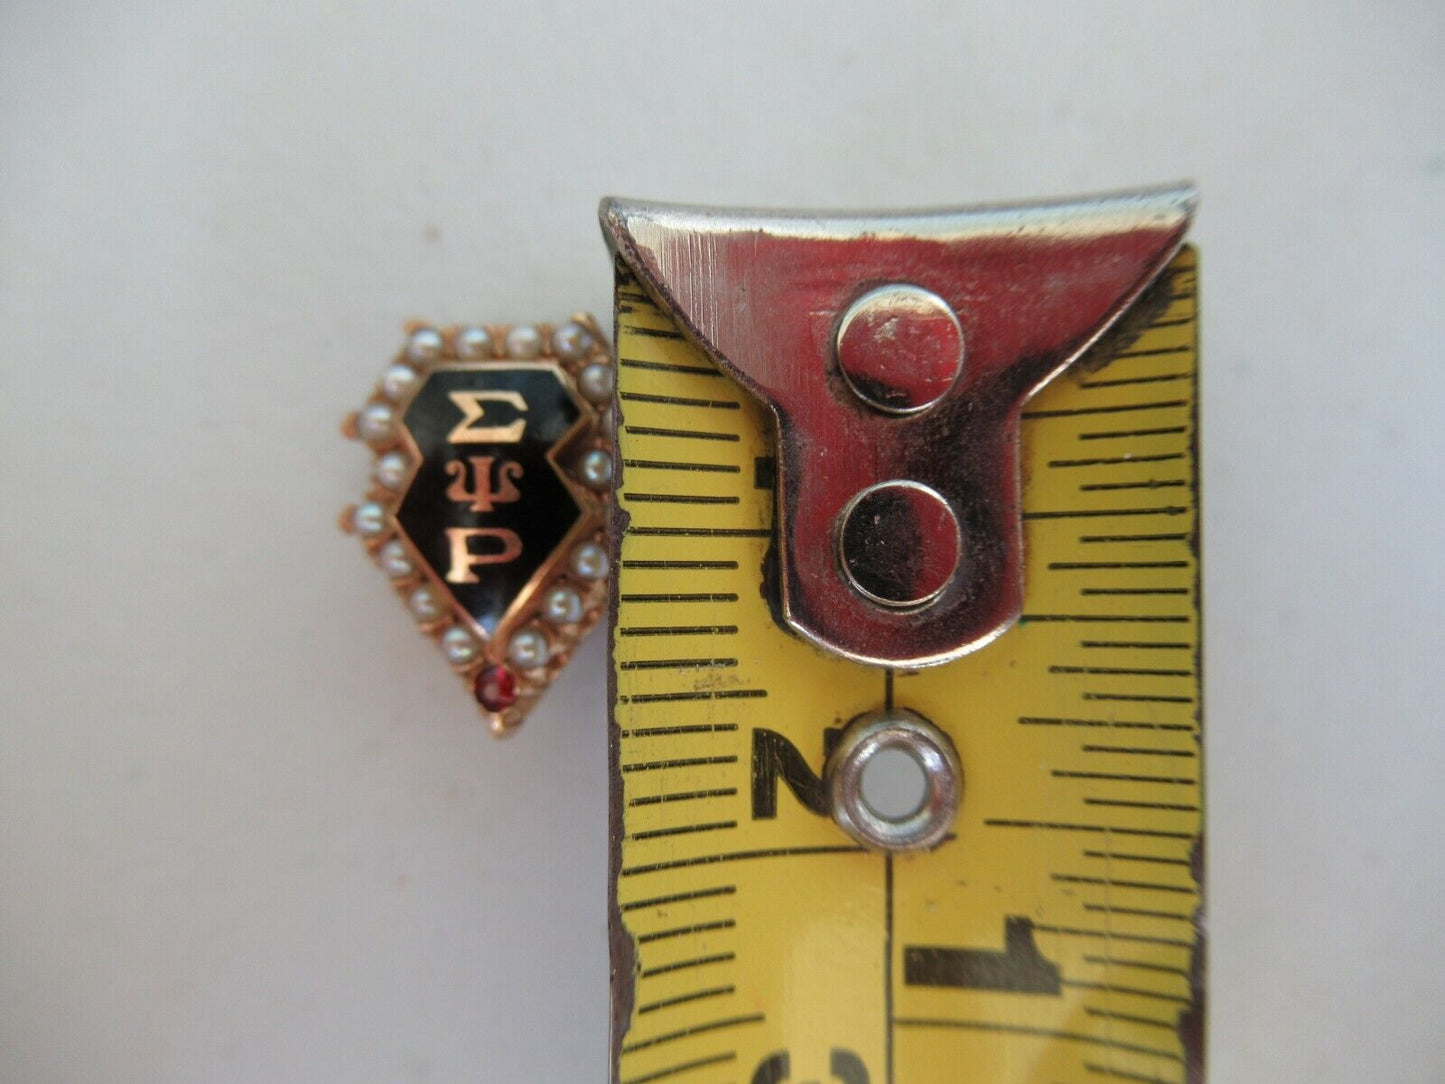 USA FRATERNITY PIN SIGMA PSI RHO. MADE IN GOLD 14K. MARKED.1395